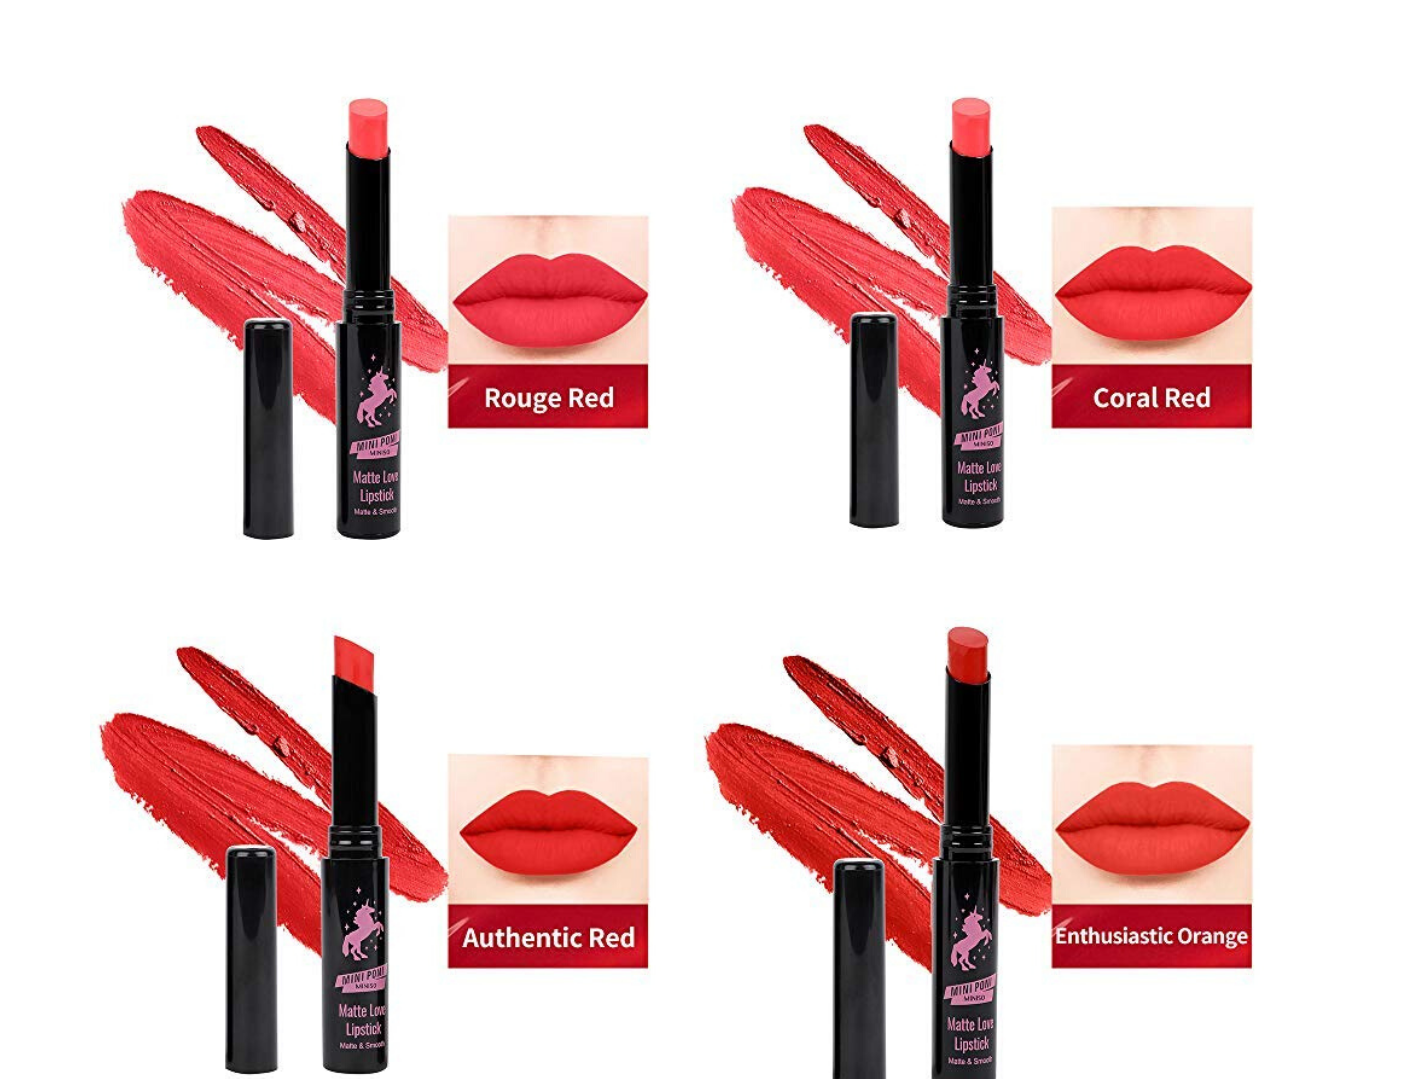 The shades &#x27;Rouge Red&#x27;, &#x27;Coral Red&#x27;, &#x27;Authentic Red&#x27; and &#x27;Enthusiastic Red&#x27;